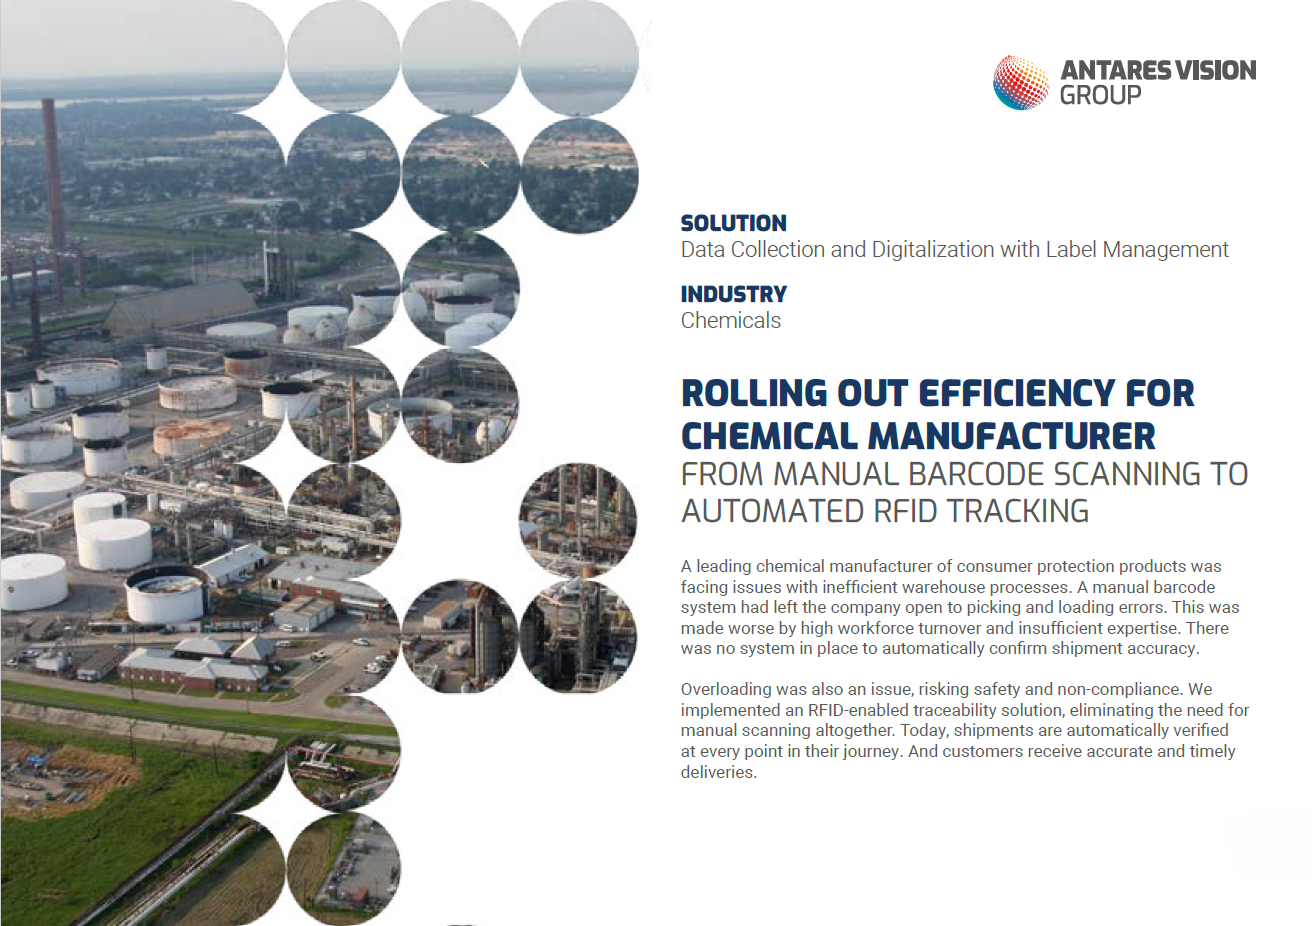 ROLLING OUT EFFICIENCY FOR CHEMICAL MANUFACTURER